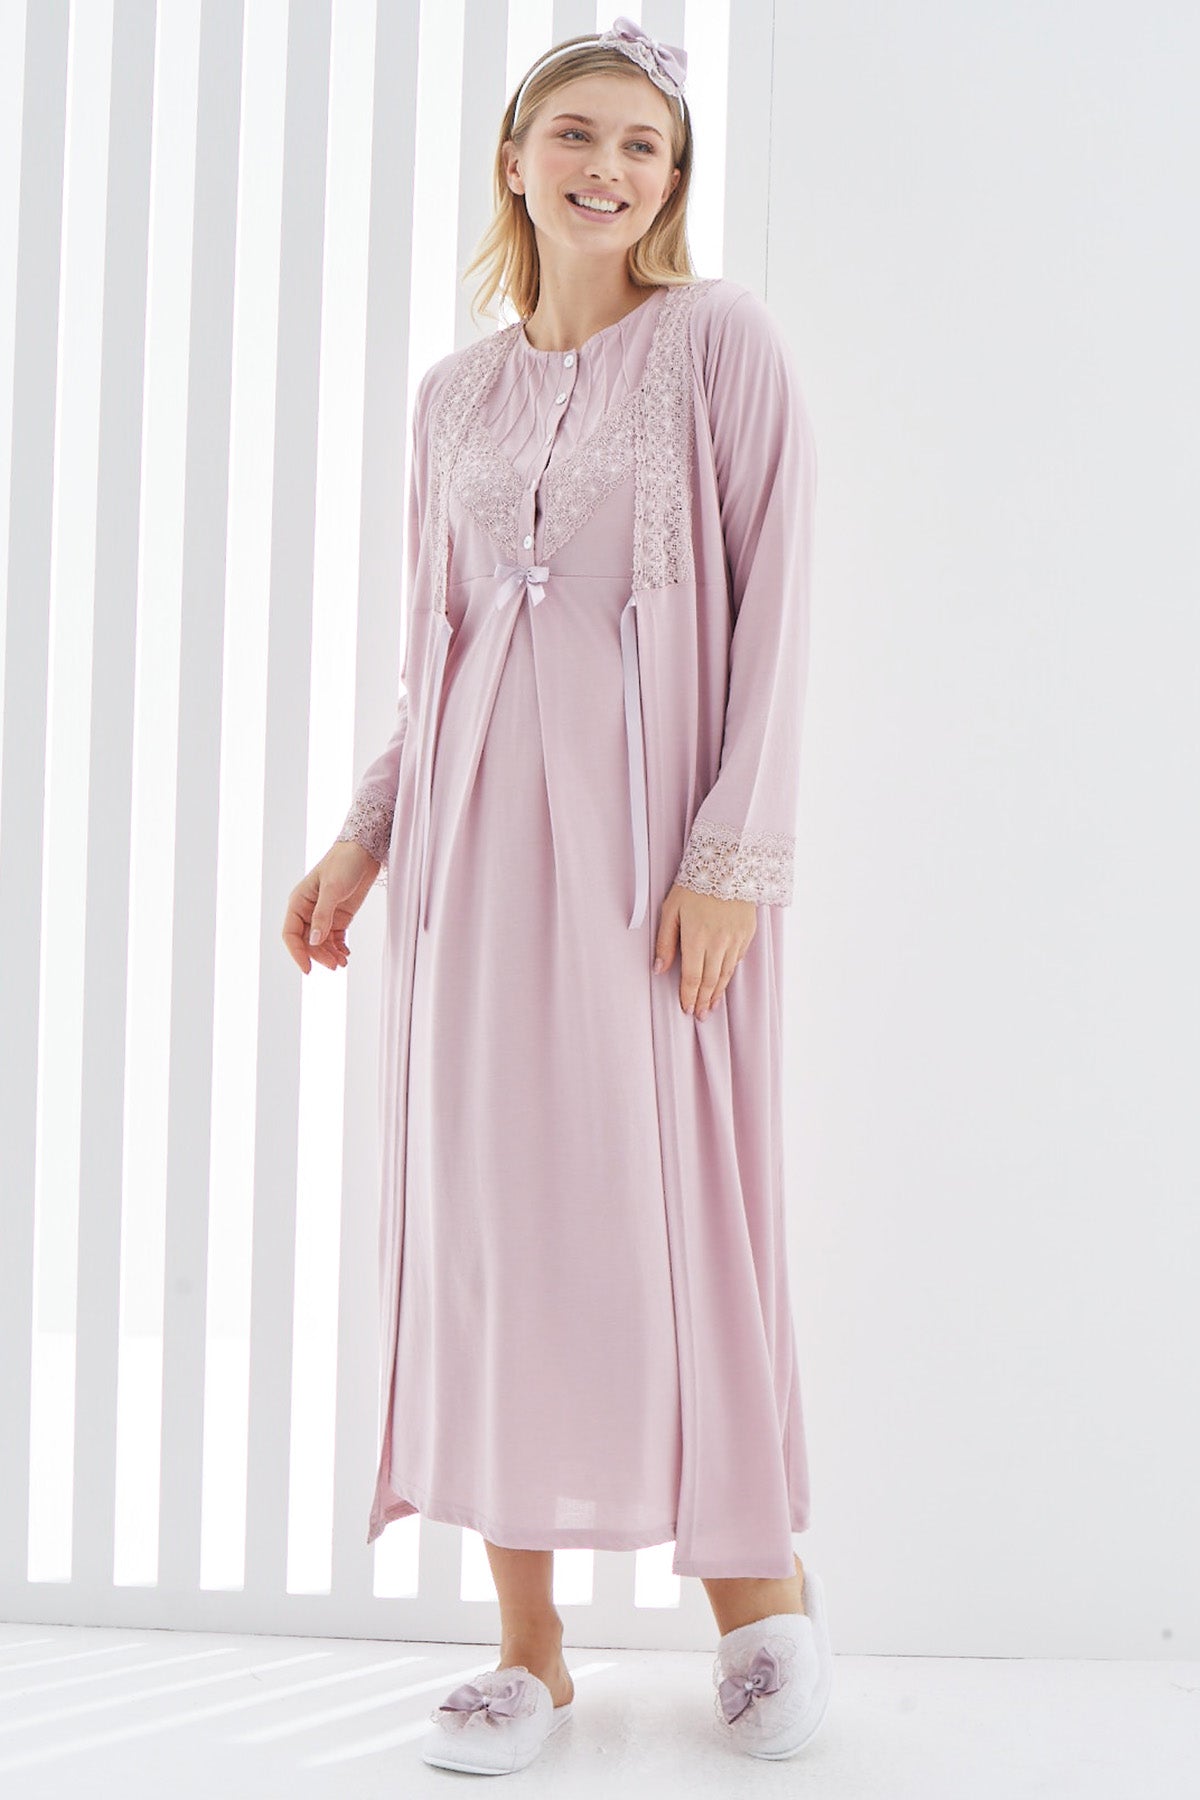 Shopymommy 2270 Lace Detailed Maternity & Nursing Nightgown With Robe Dried Rose